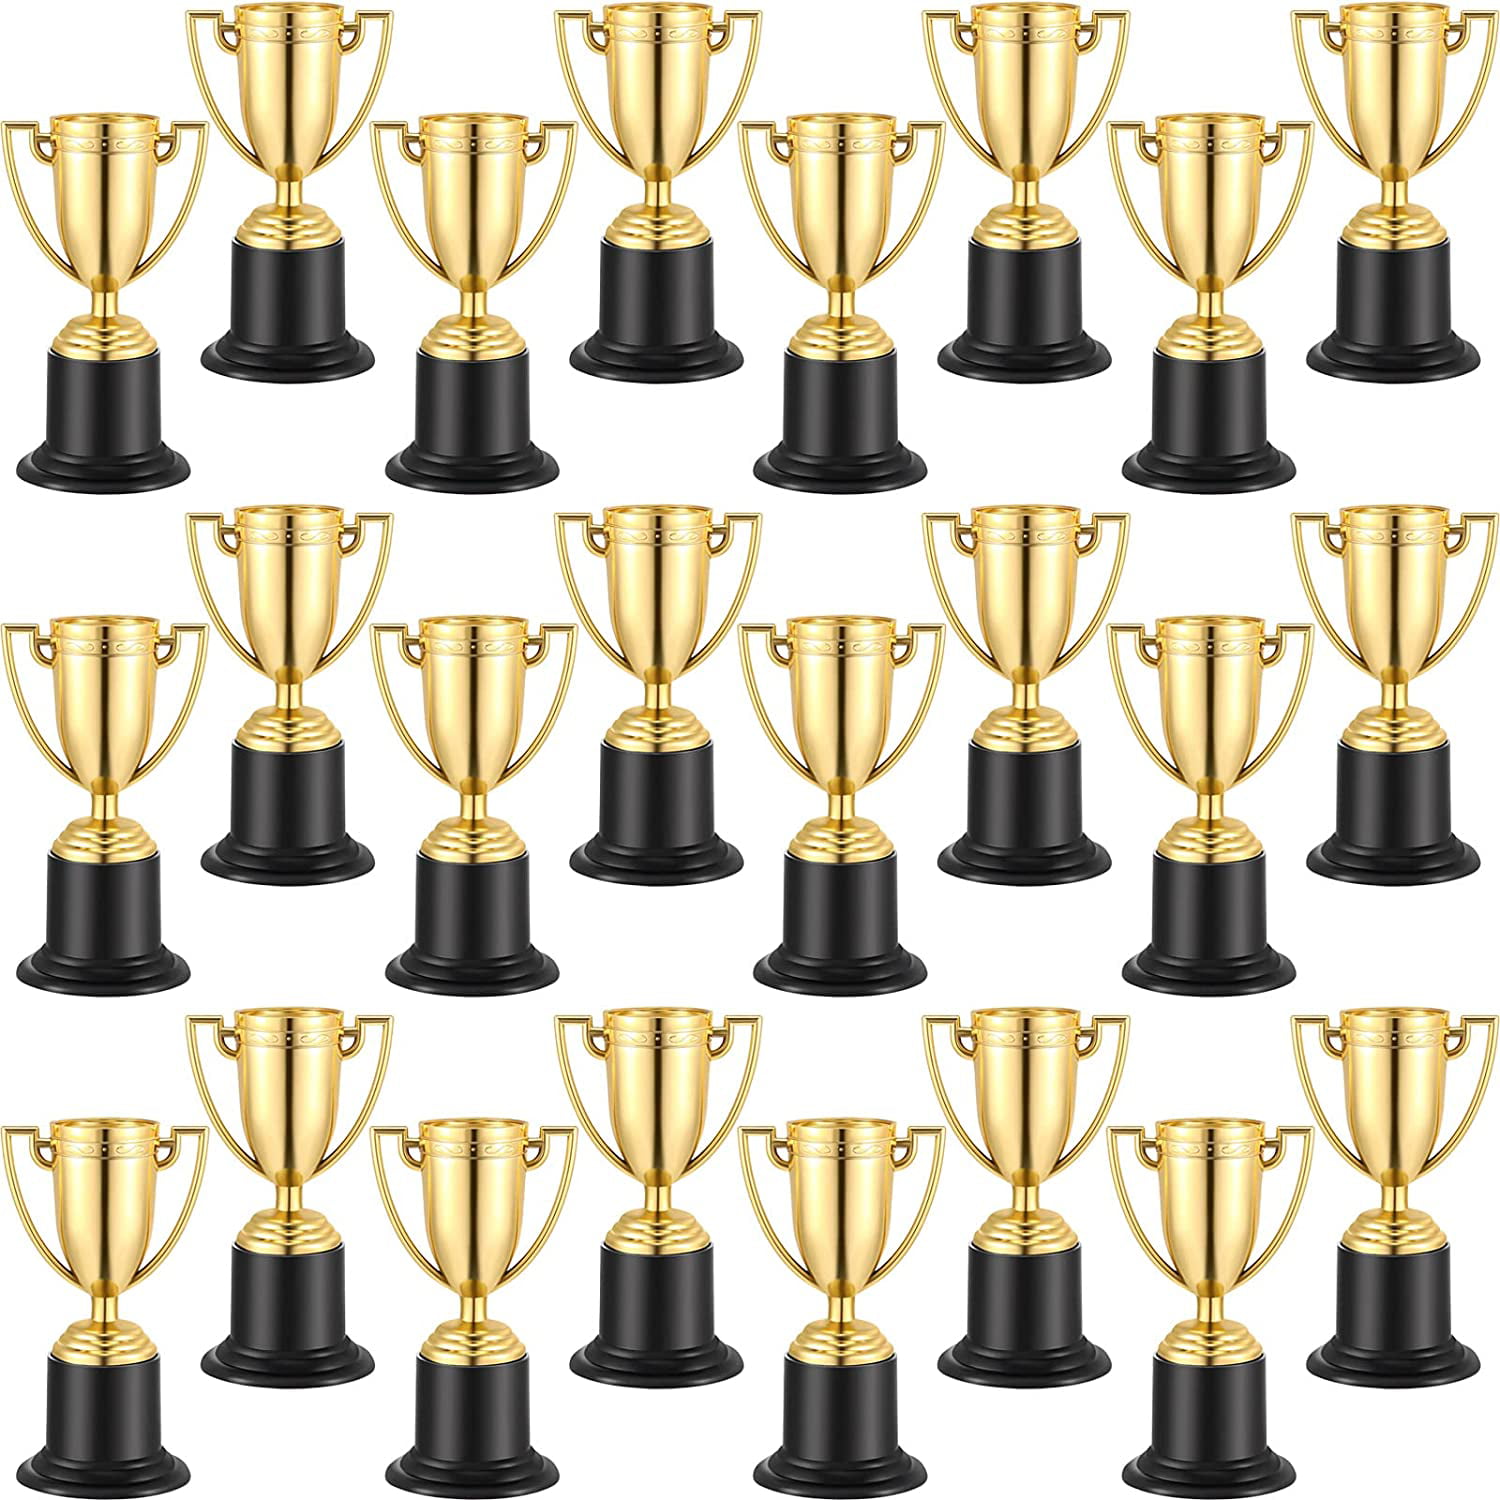 3 Pieces Plastic Gold Trophy Cups Gold Award Trophies Party Award Trophy Winner Award Trophies for Kids Boys Girls Sports Tournaments Competitions Ceremony Parties Favor 1.8 x 1.8 x 3.3 Inch 